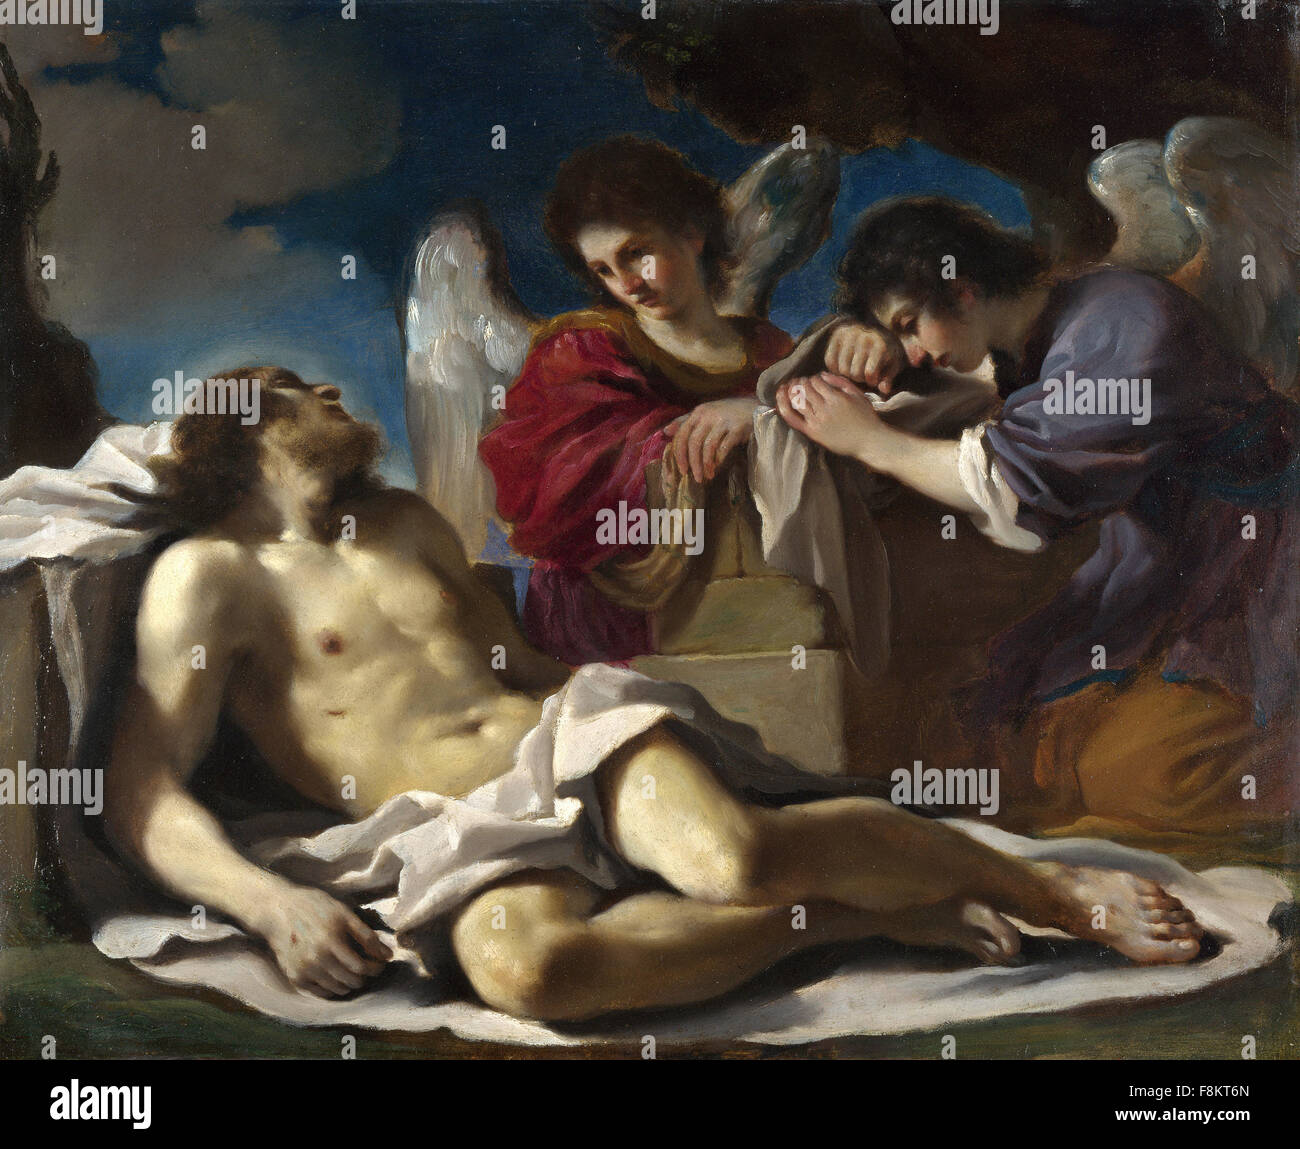 Giovanni Francesco Barbieri - Guercino - The Dead Christ mourned by Two Angels Stock Photo